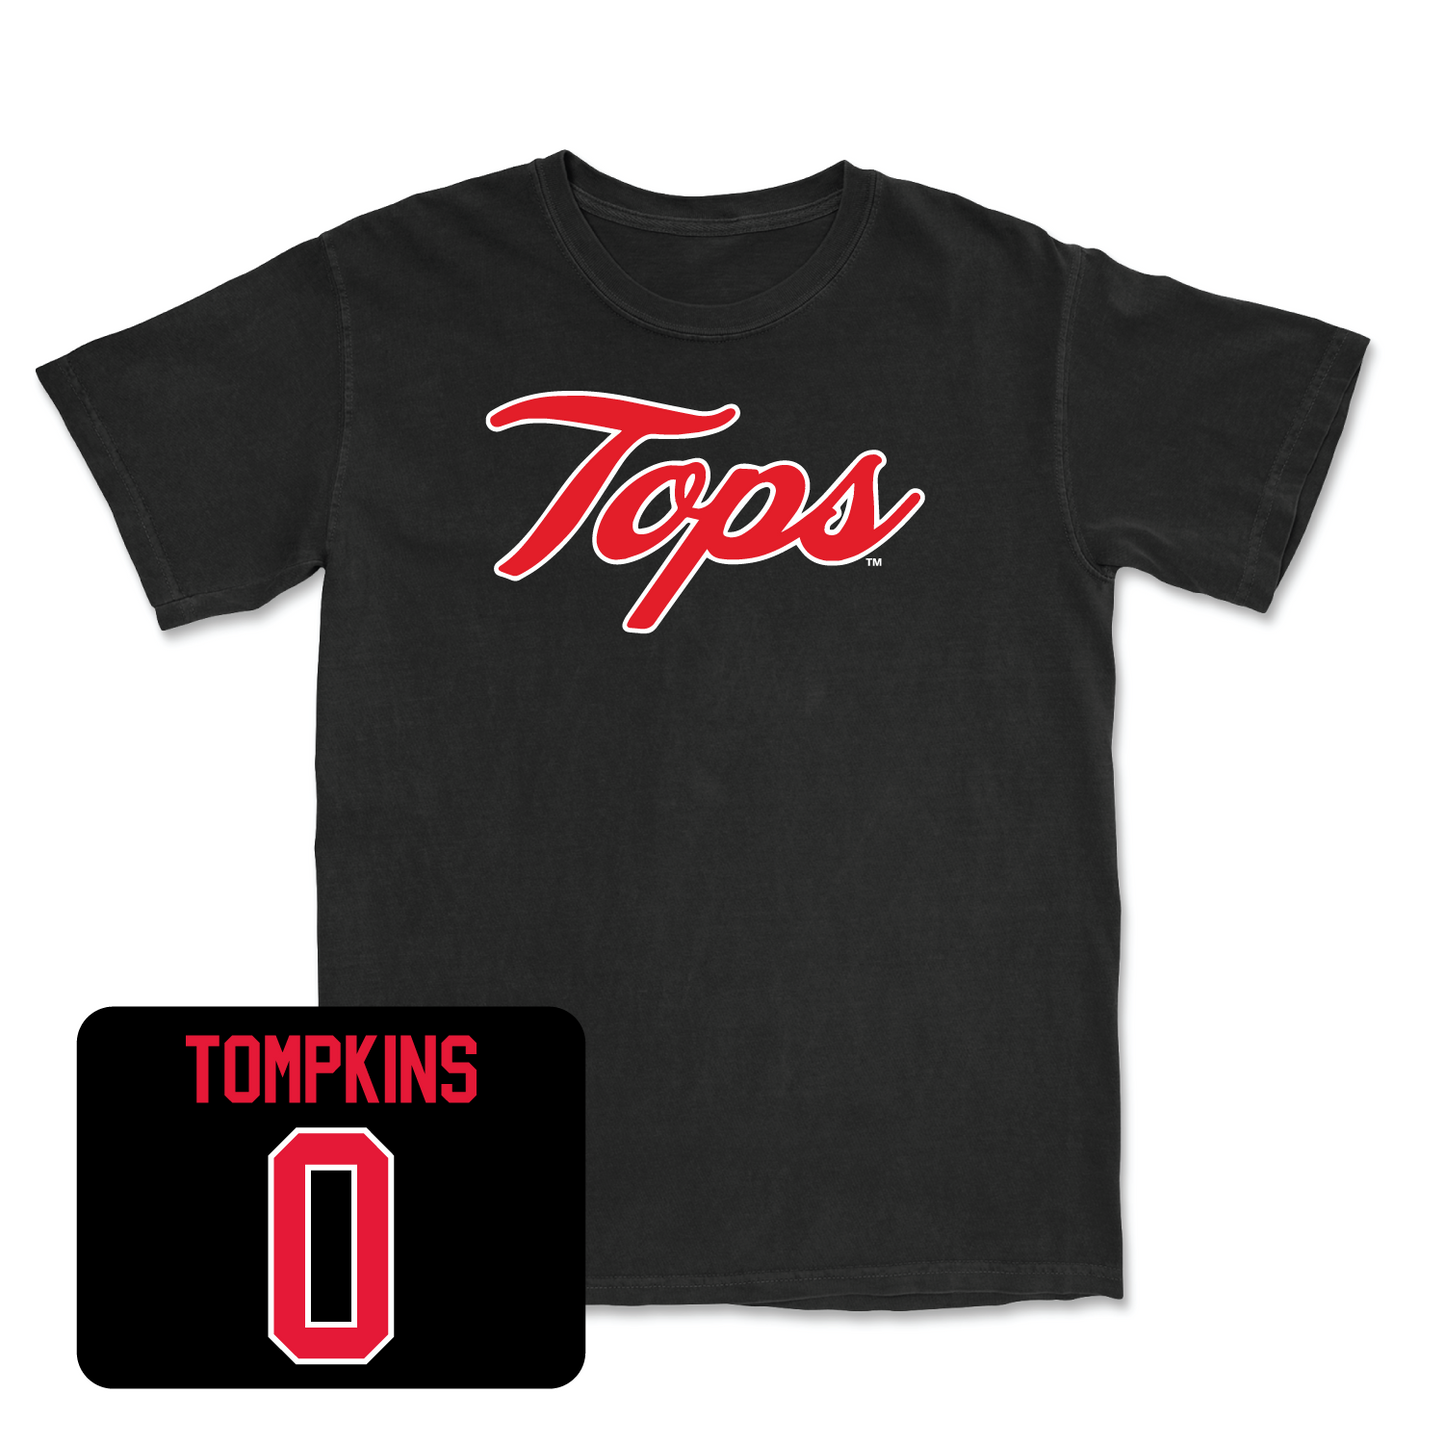 Black Women's Soccer Tops Tee 2 Youth Large / Emma Tompkins | #00